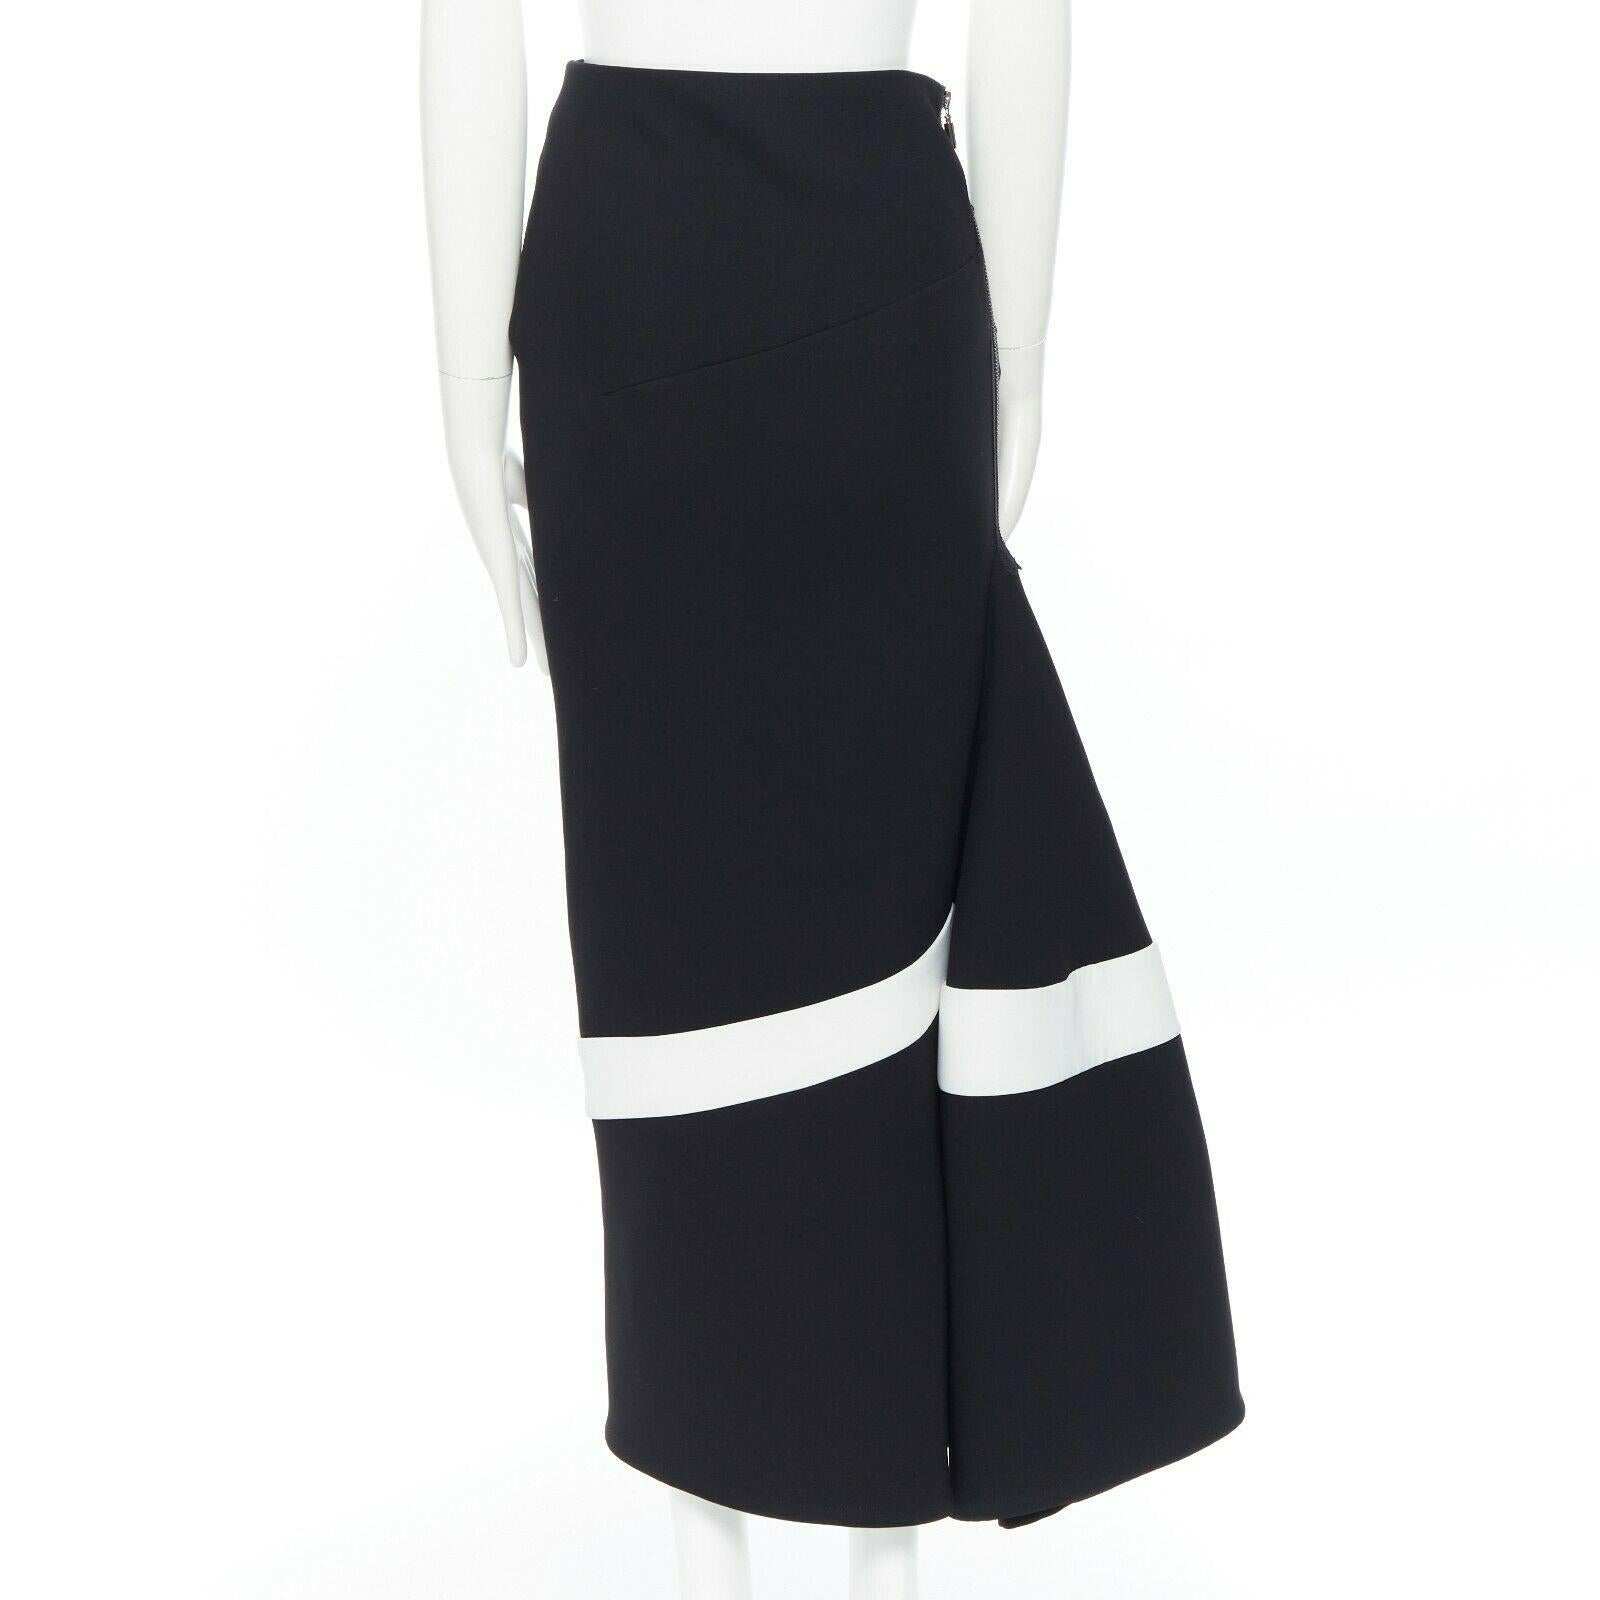 MATICEVSKI black white asymmetric architectural trumpet midi skirt train AU6 Reference: LNKO/A01111 
Brand: Maticevski 
Collection: Fall Winter 2015 
Material: Polyester 
Color: Black 
Pattern: Striped 
Closure: Zip 
Extra Detail: Asymmetrical